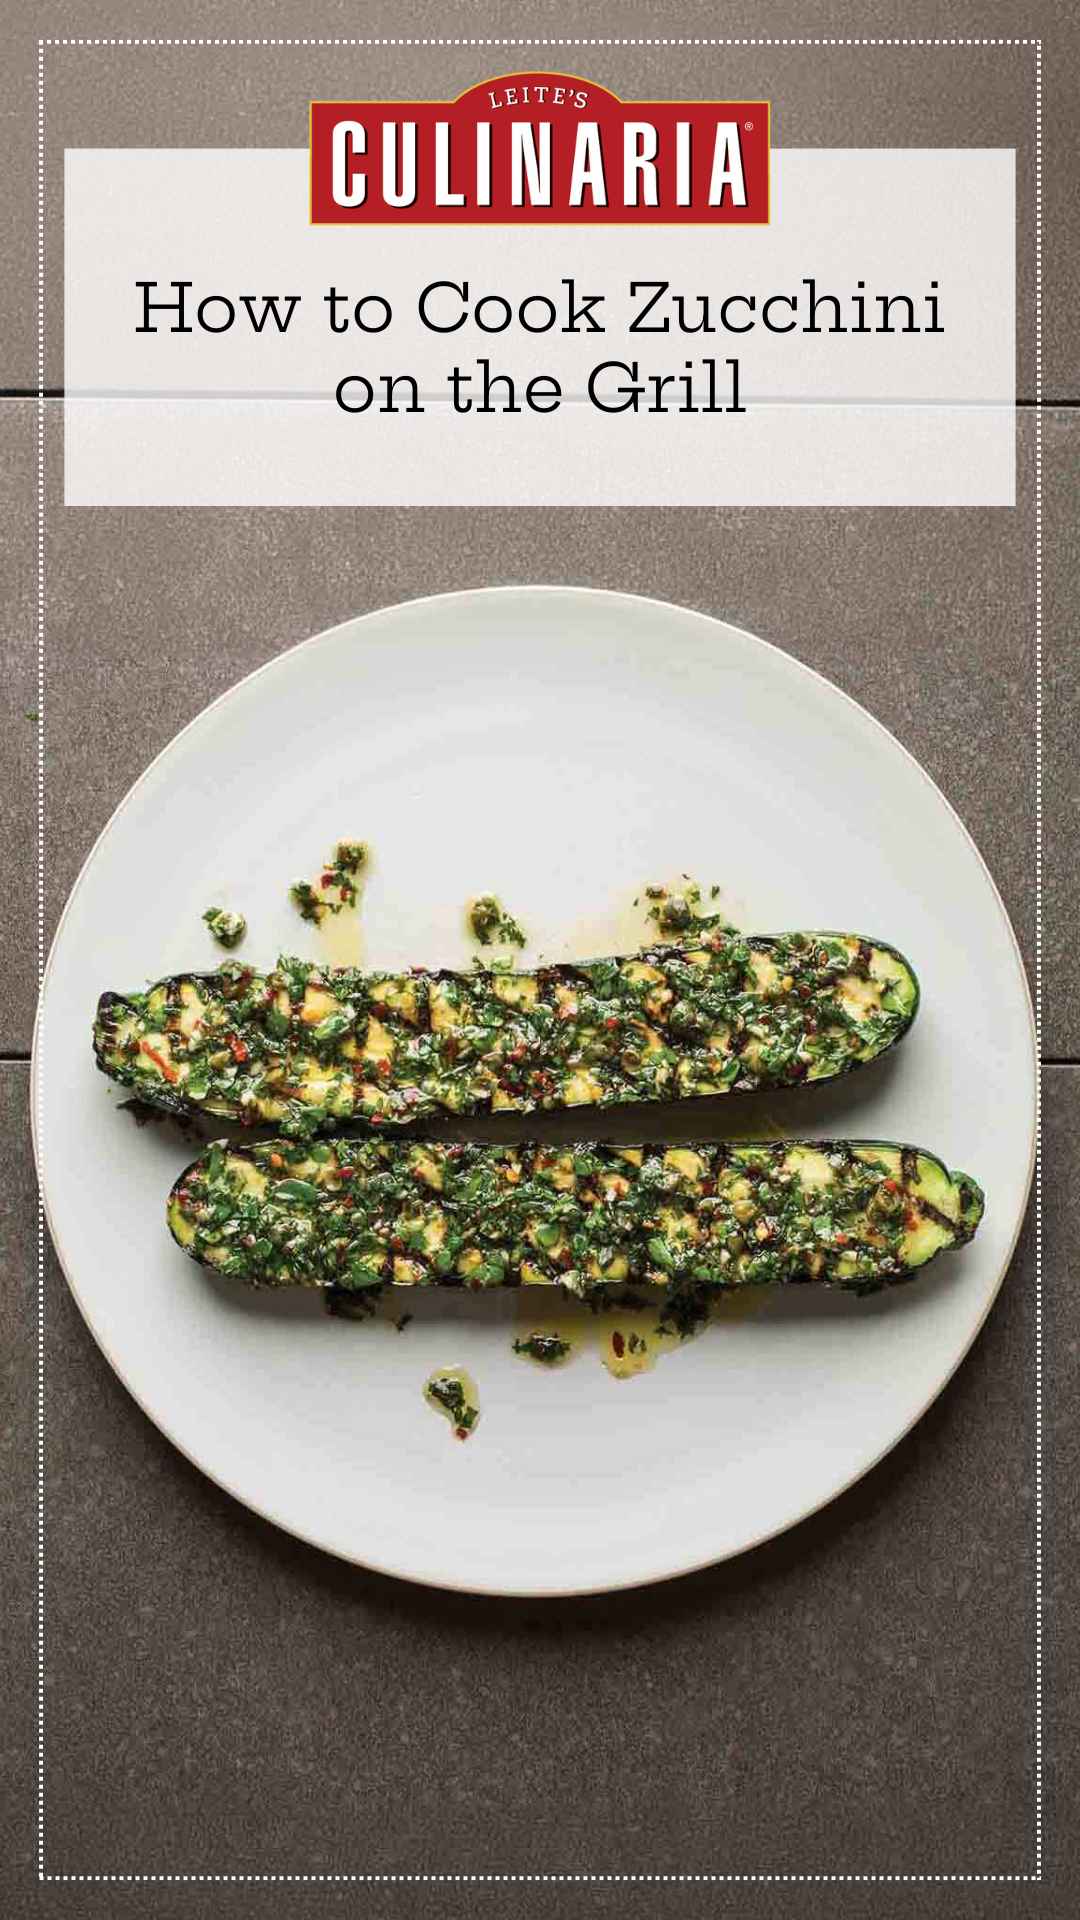 Two grilled zucchini halves topped with mint salsa on a white plate.